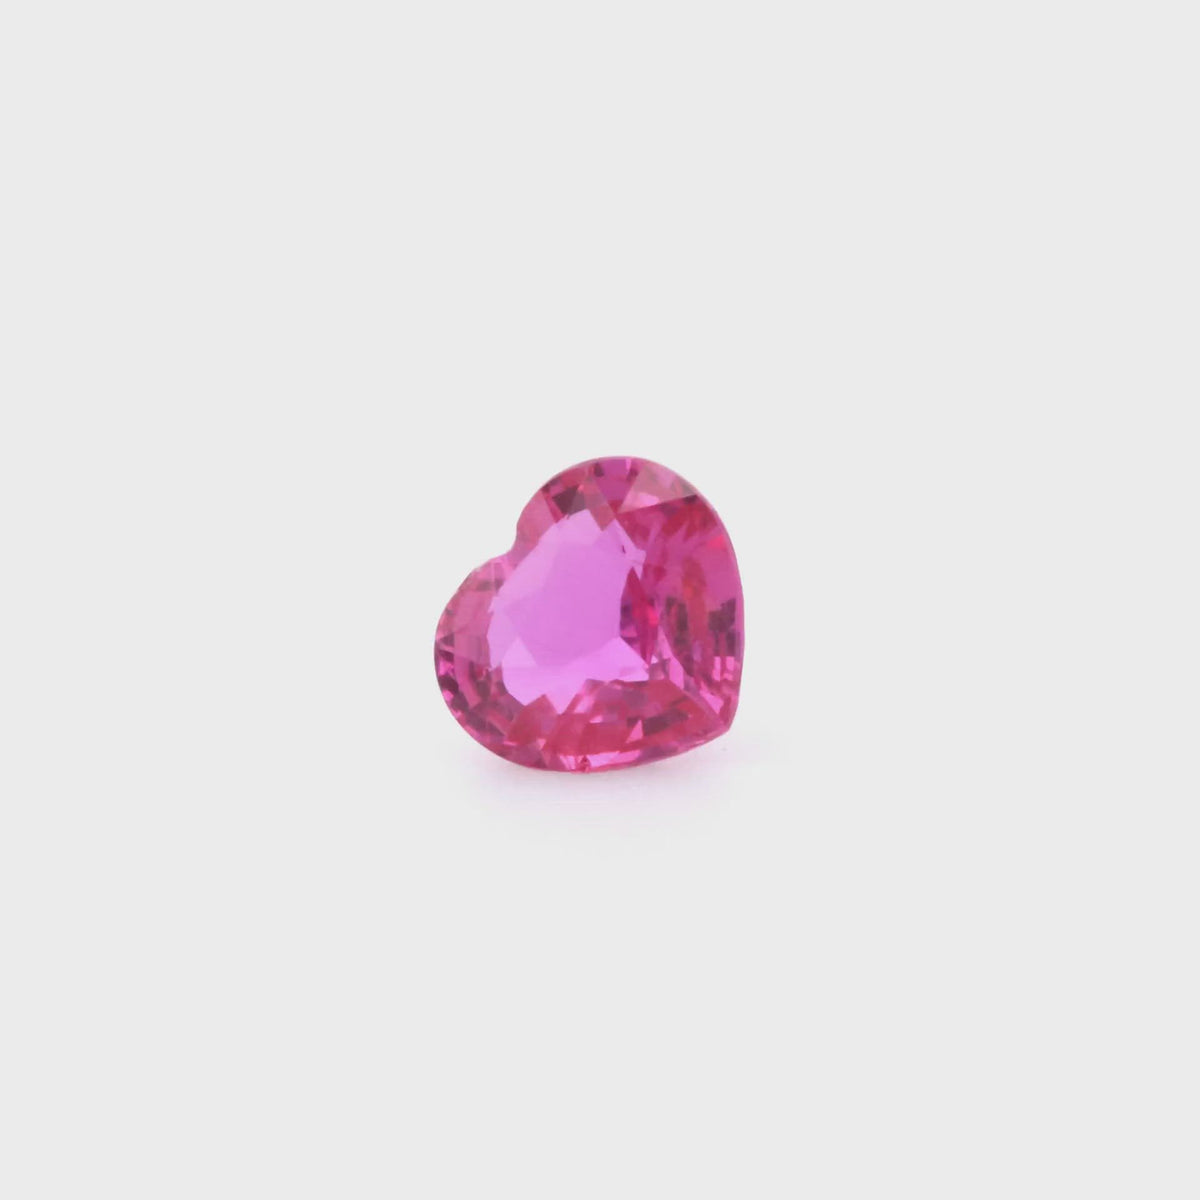 Heart shaped inclusion in morganite. Source : ruby-sapphire.com